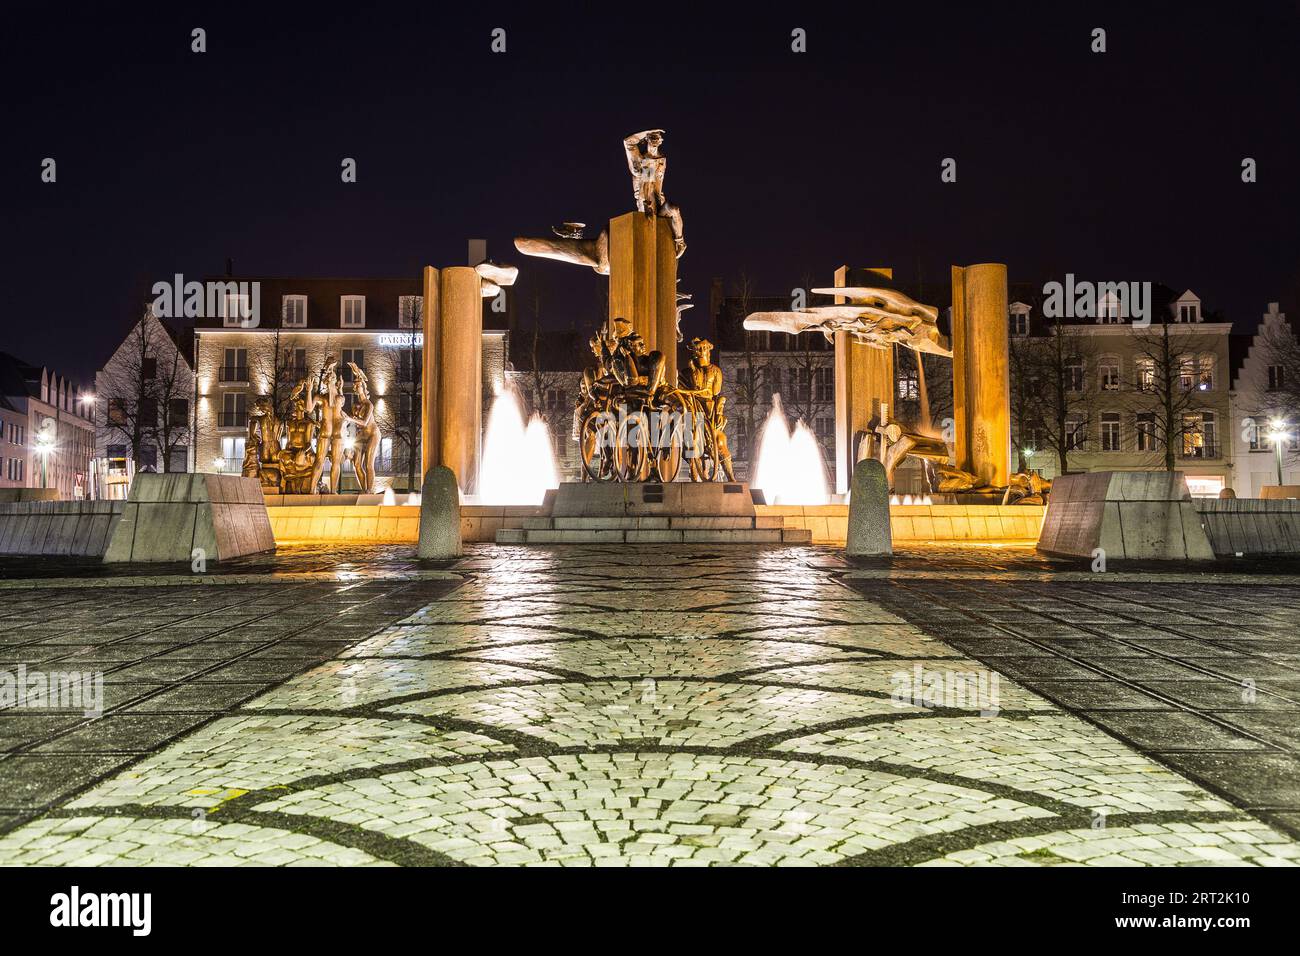 BRUGES, BELGIUM - 19th FEBRUARY 2016: A view towards a water fountain and statue at Het Zand square at night in Bruges. Stock Photo